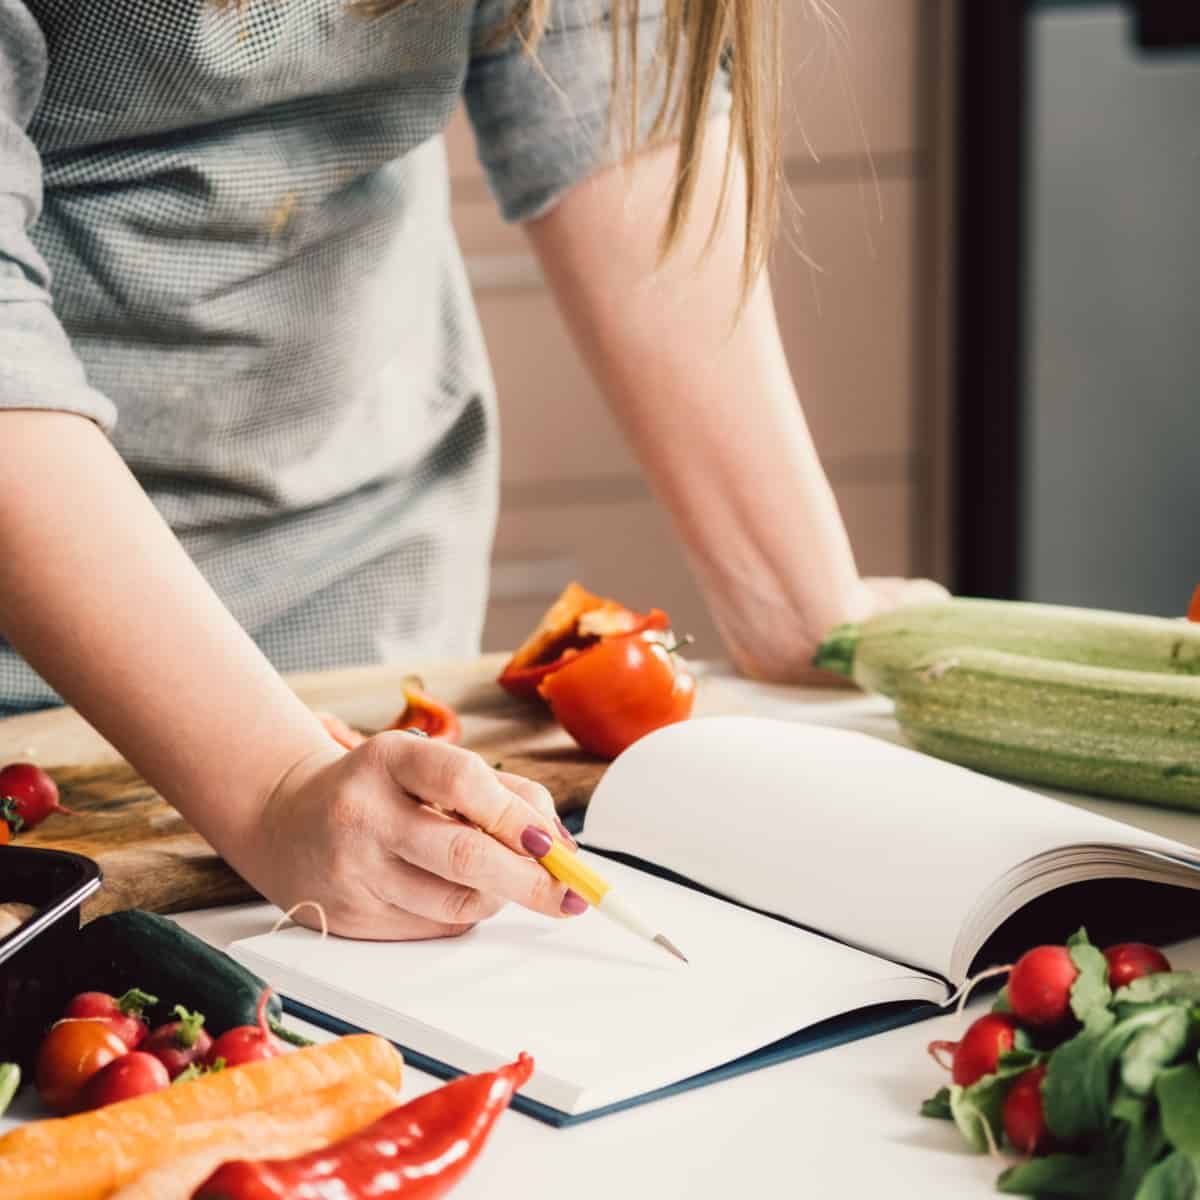 Woman writing in notebook on kitchen counter